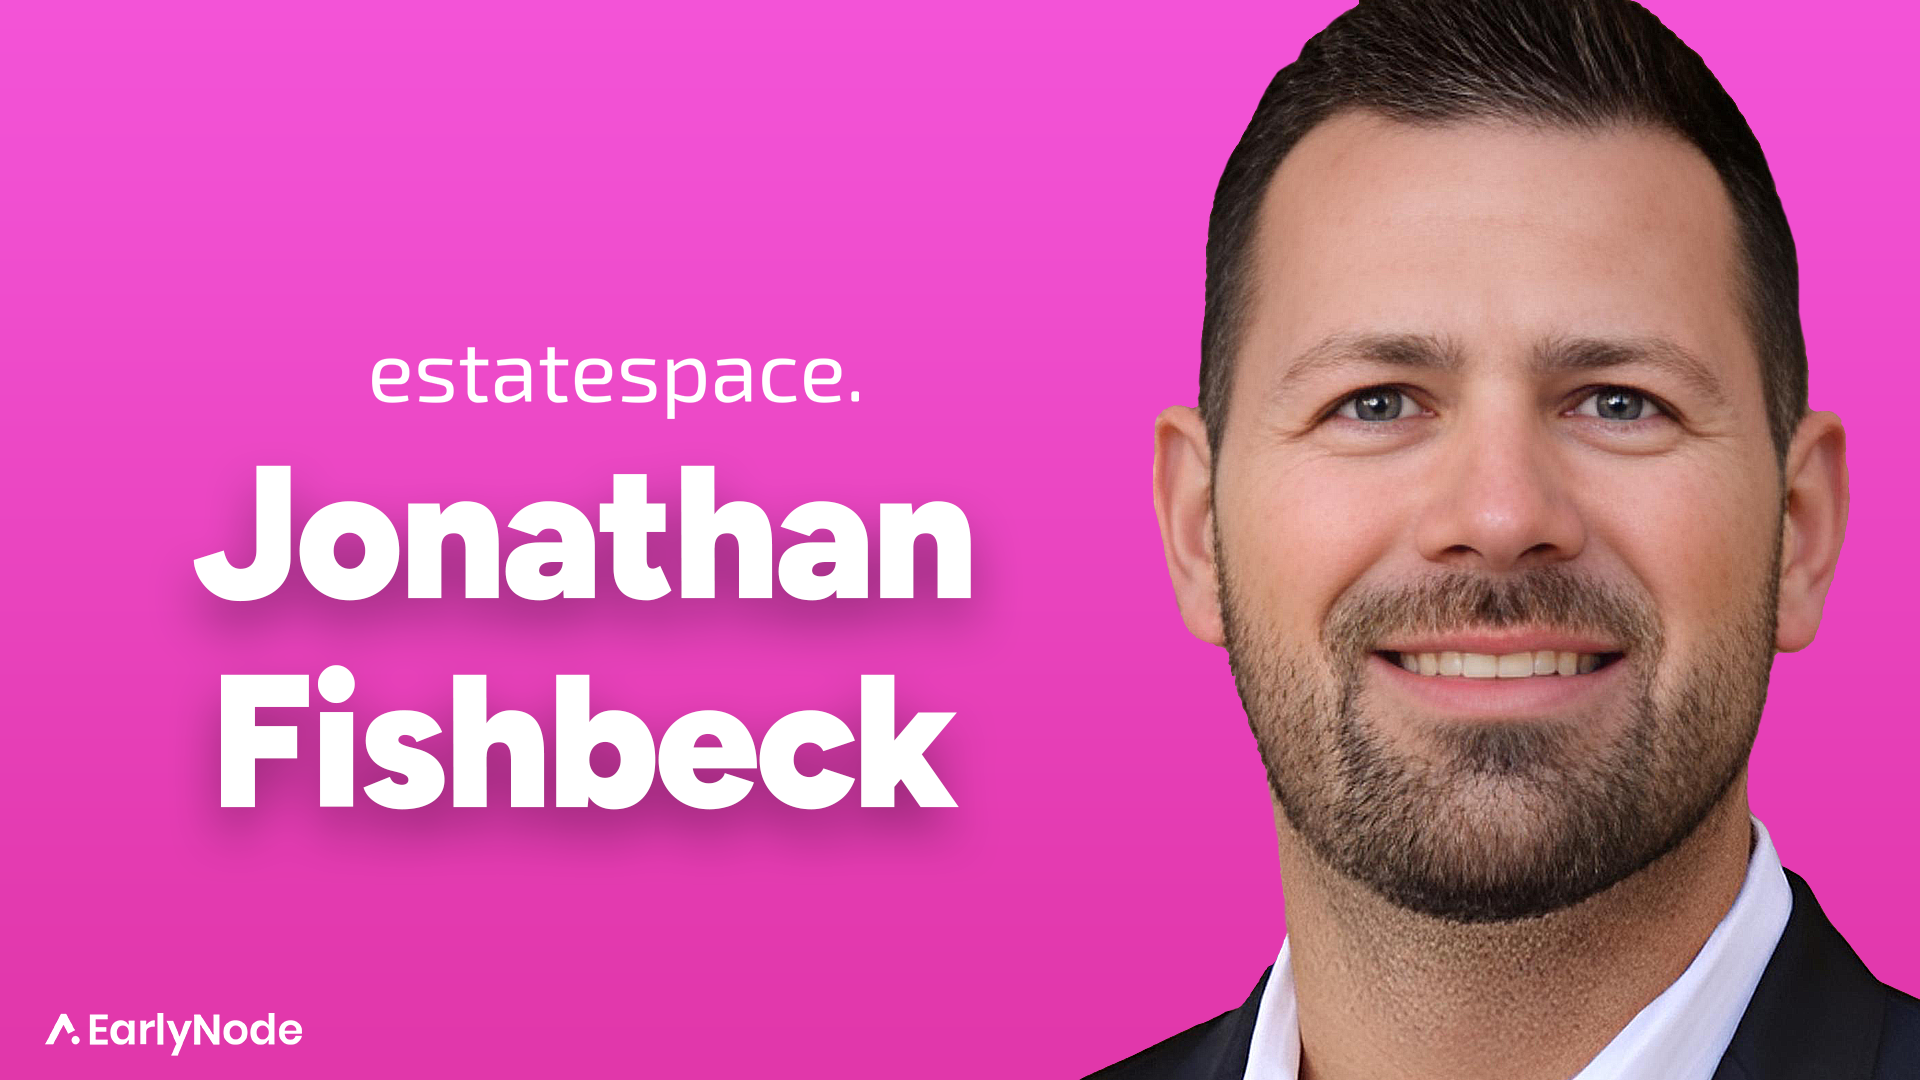 Simplifying Asset Management for High Net Worth Clients with Jonathan Fishbeck, EstateSpace Founder